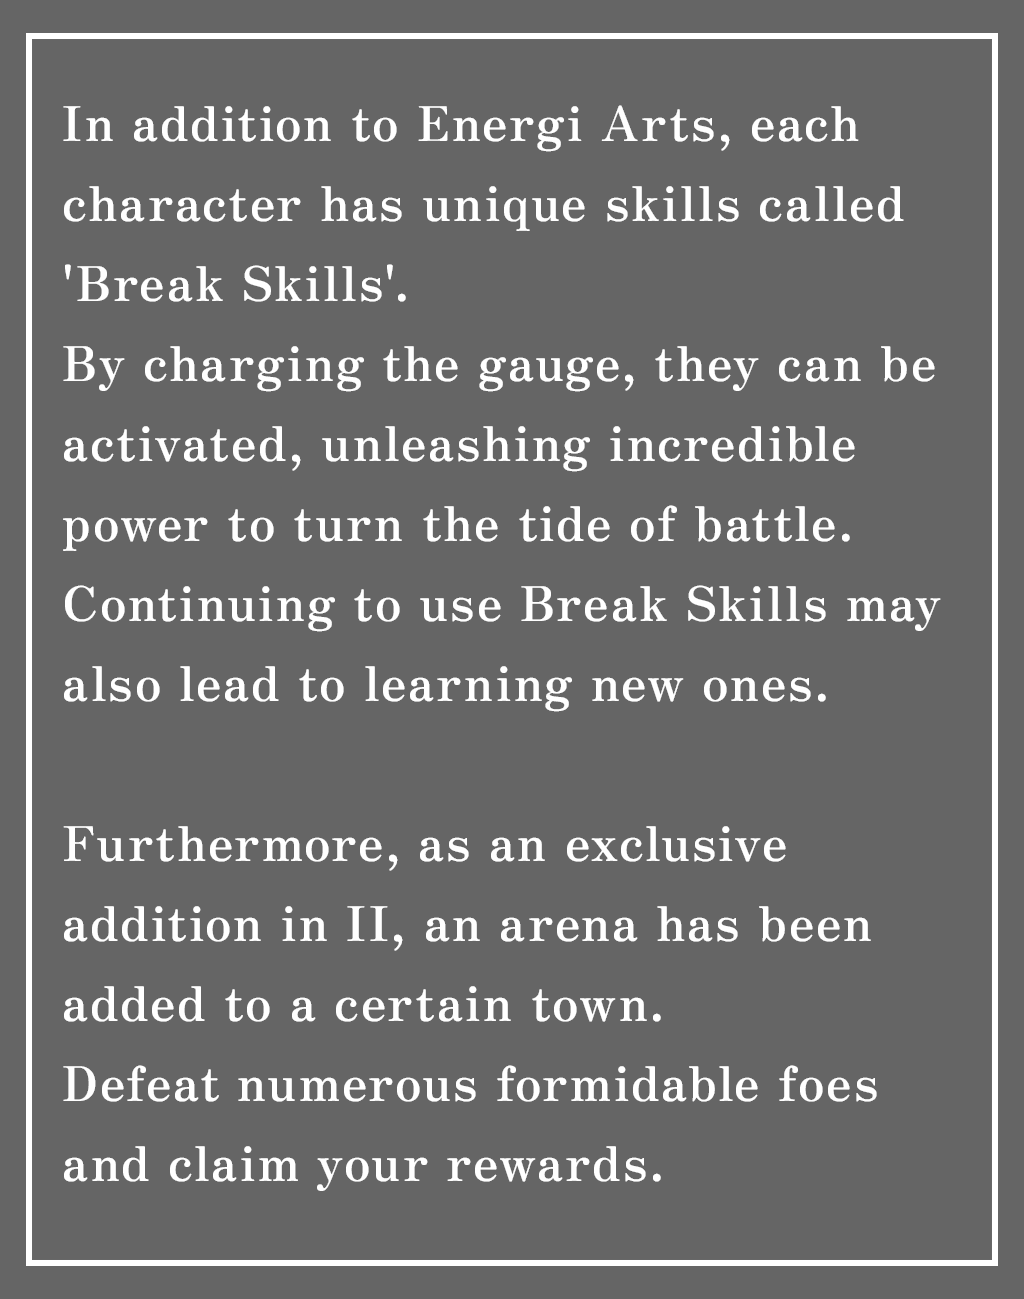 In addition to Energi Arts, each character has unique skills called 'Break Skills.'
By charging the gauge, they can be activated, unleashing incredible power to turn the tide of battle.
Continuing to use Break Skills may also lead to learning new ones.

Furthermore, as an exclusive addition in II, an arena has been added to a certain town.
Defeat numerous formidable foes and claim your rewards.